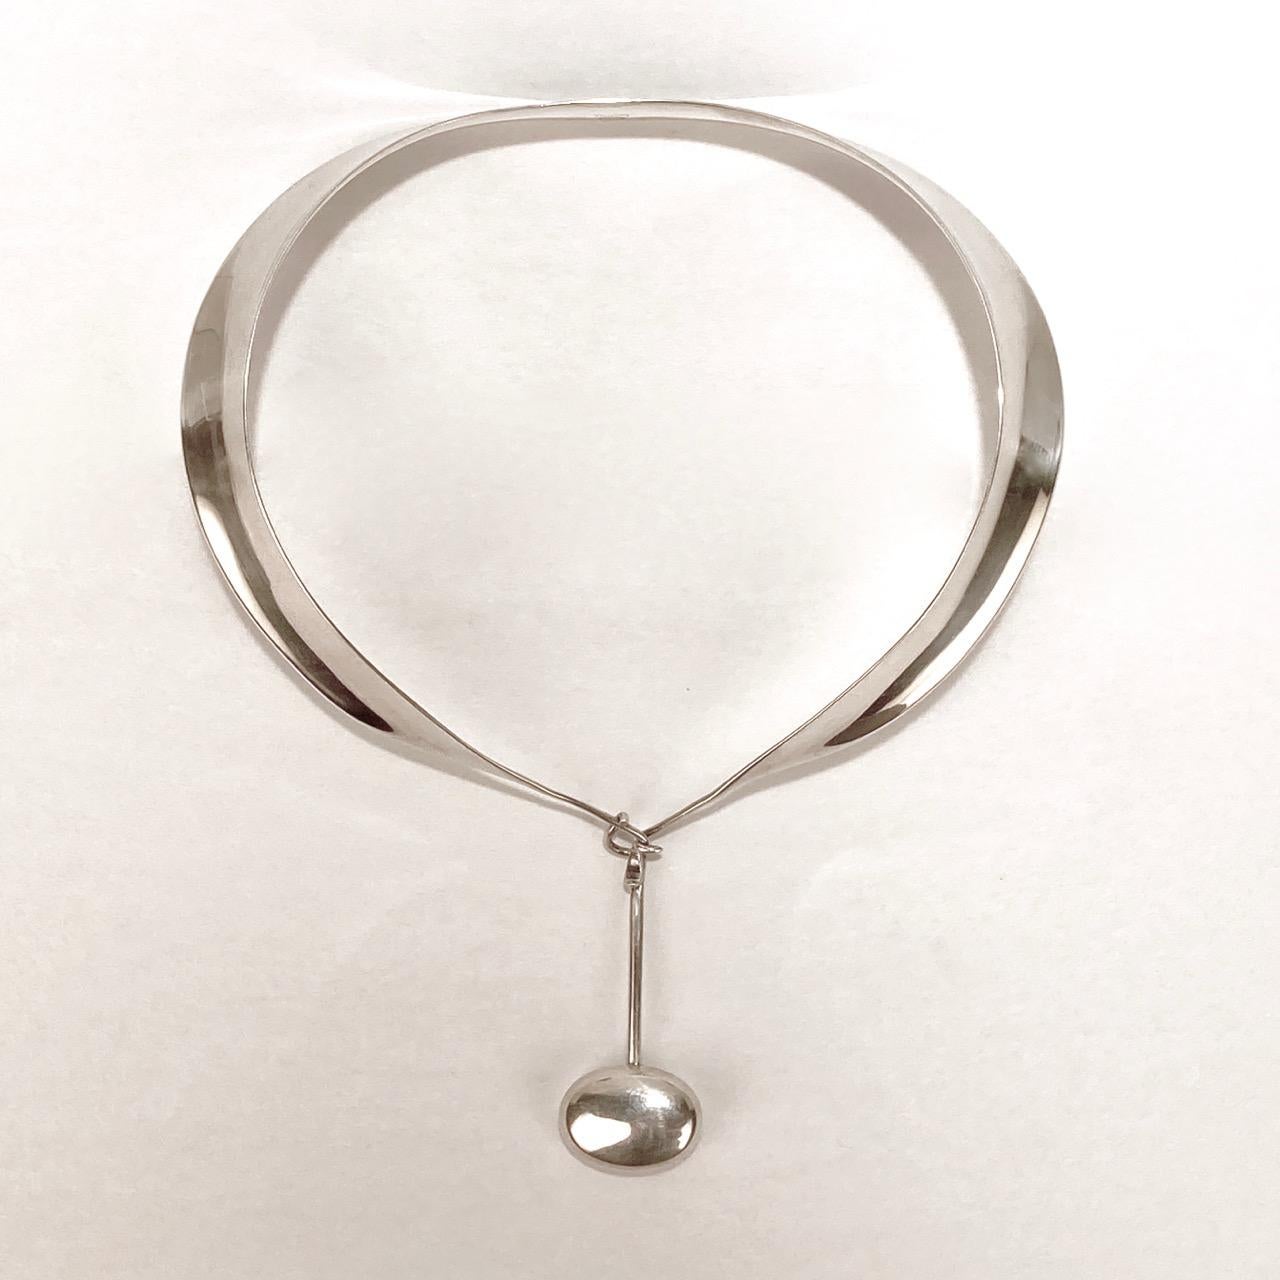 A wonderful Georg Jensen Torun Necklace in sterling silver.

Consisting of a model no. 160 choker neckpiece together with a model no. 301 pendant.

Marked for Georg Jensen, Torun, Denmark, 925s for sterling silver fineness, and with the model